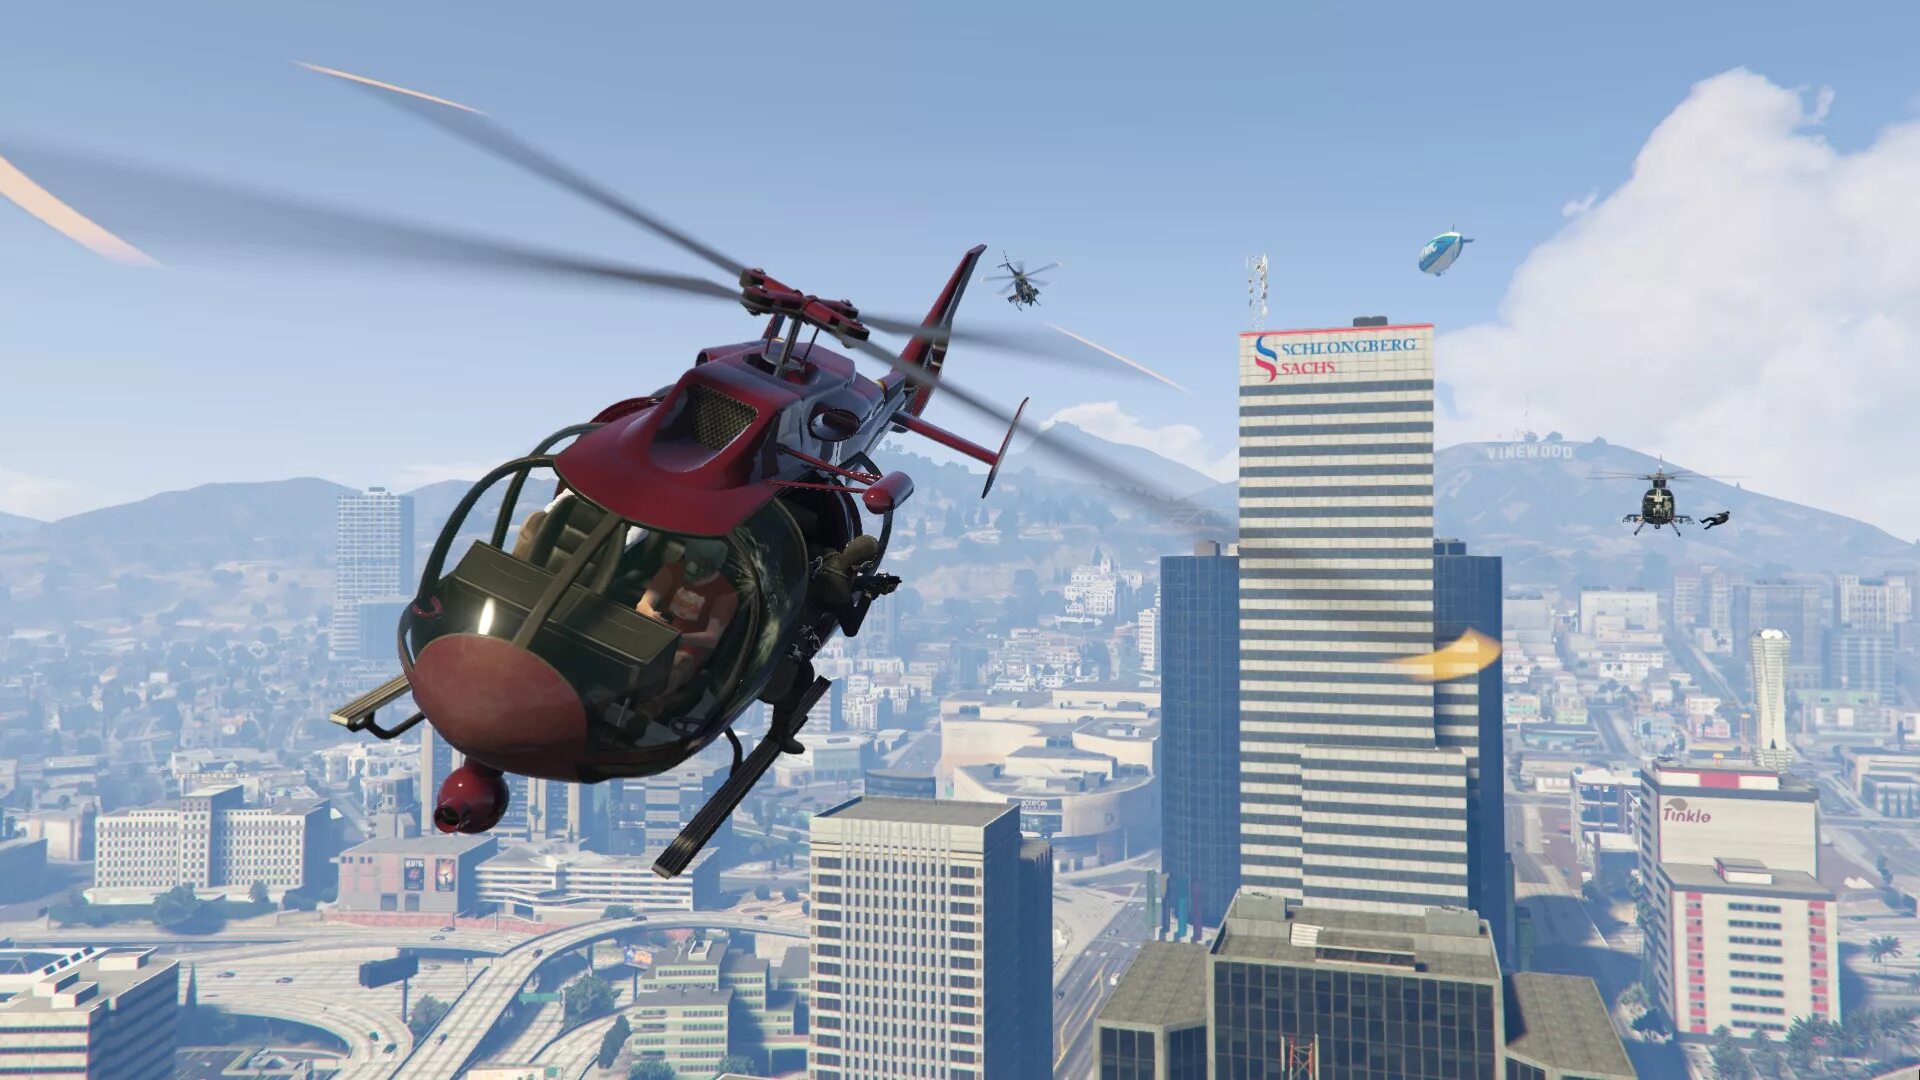 R v games. GTA 5 Flight. ПК версия Симпл Плейнс. GTA 5 Helicopter PNG. Nestle Helicopter PC game.